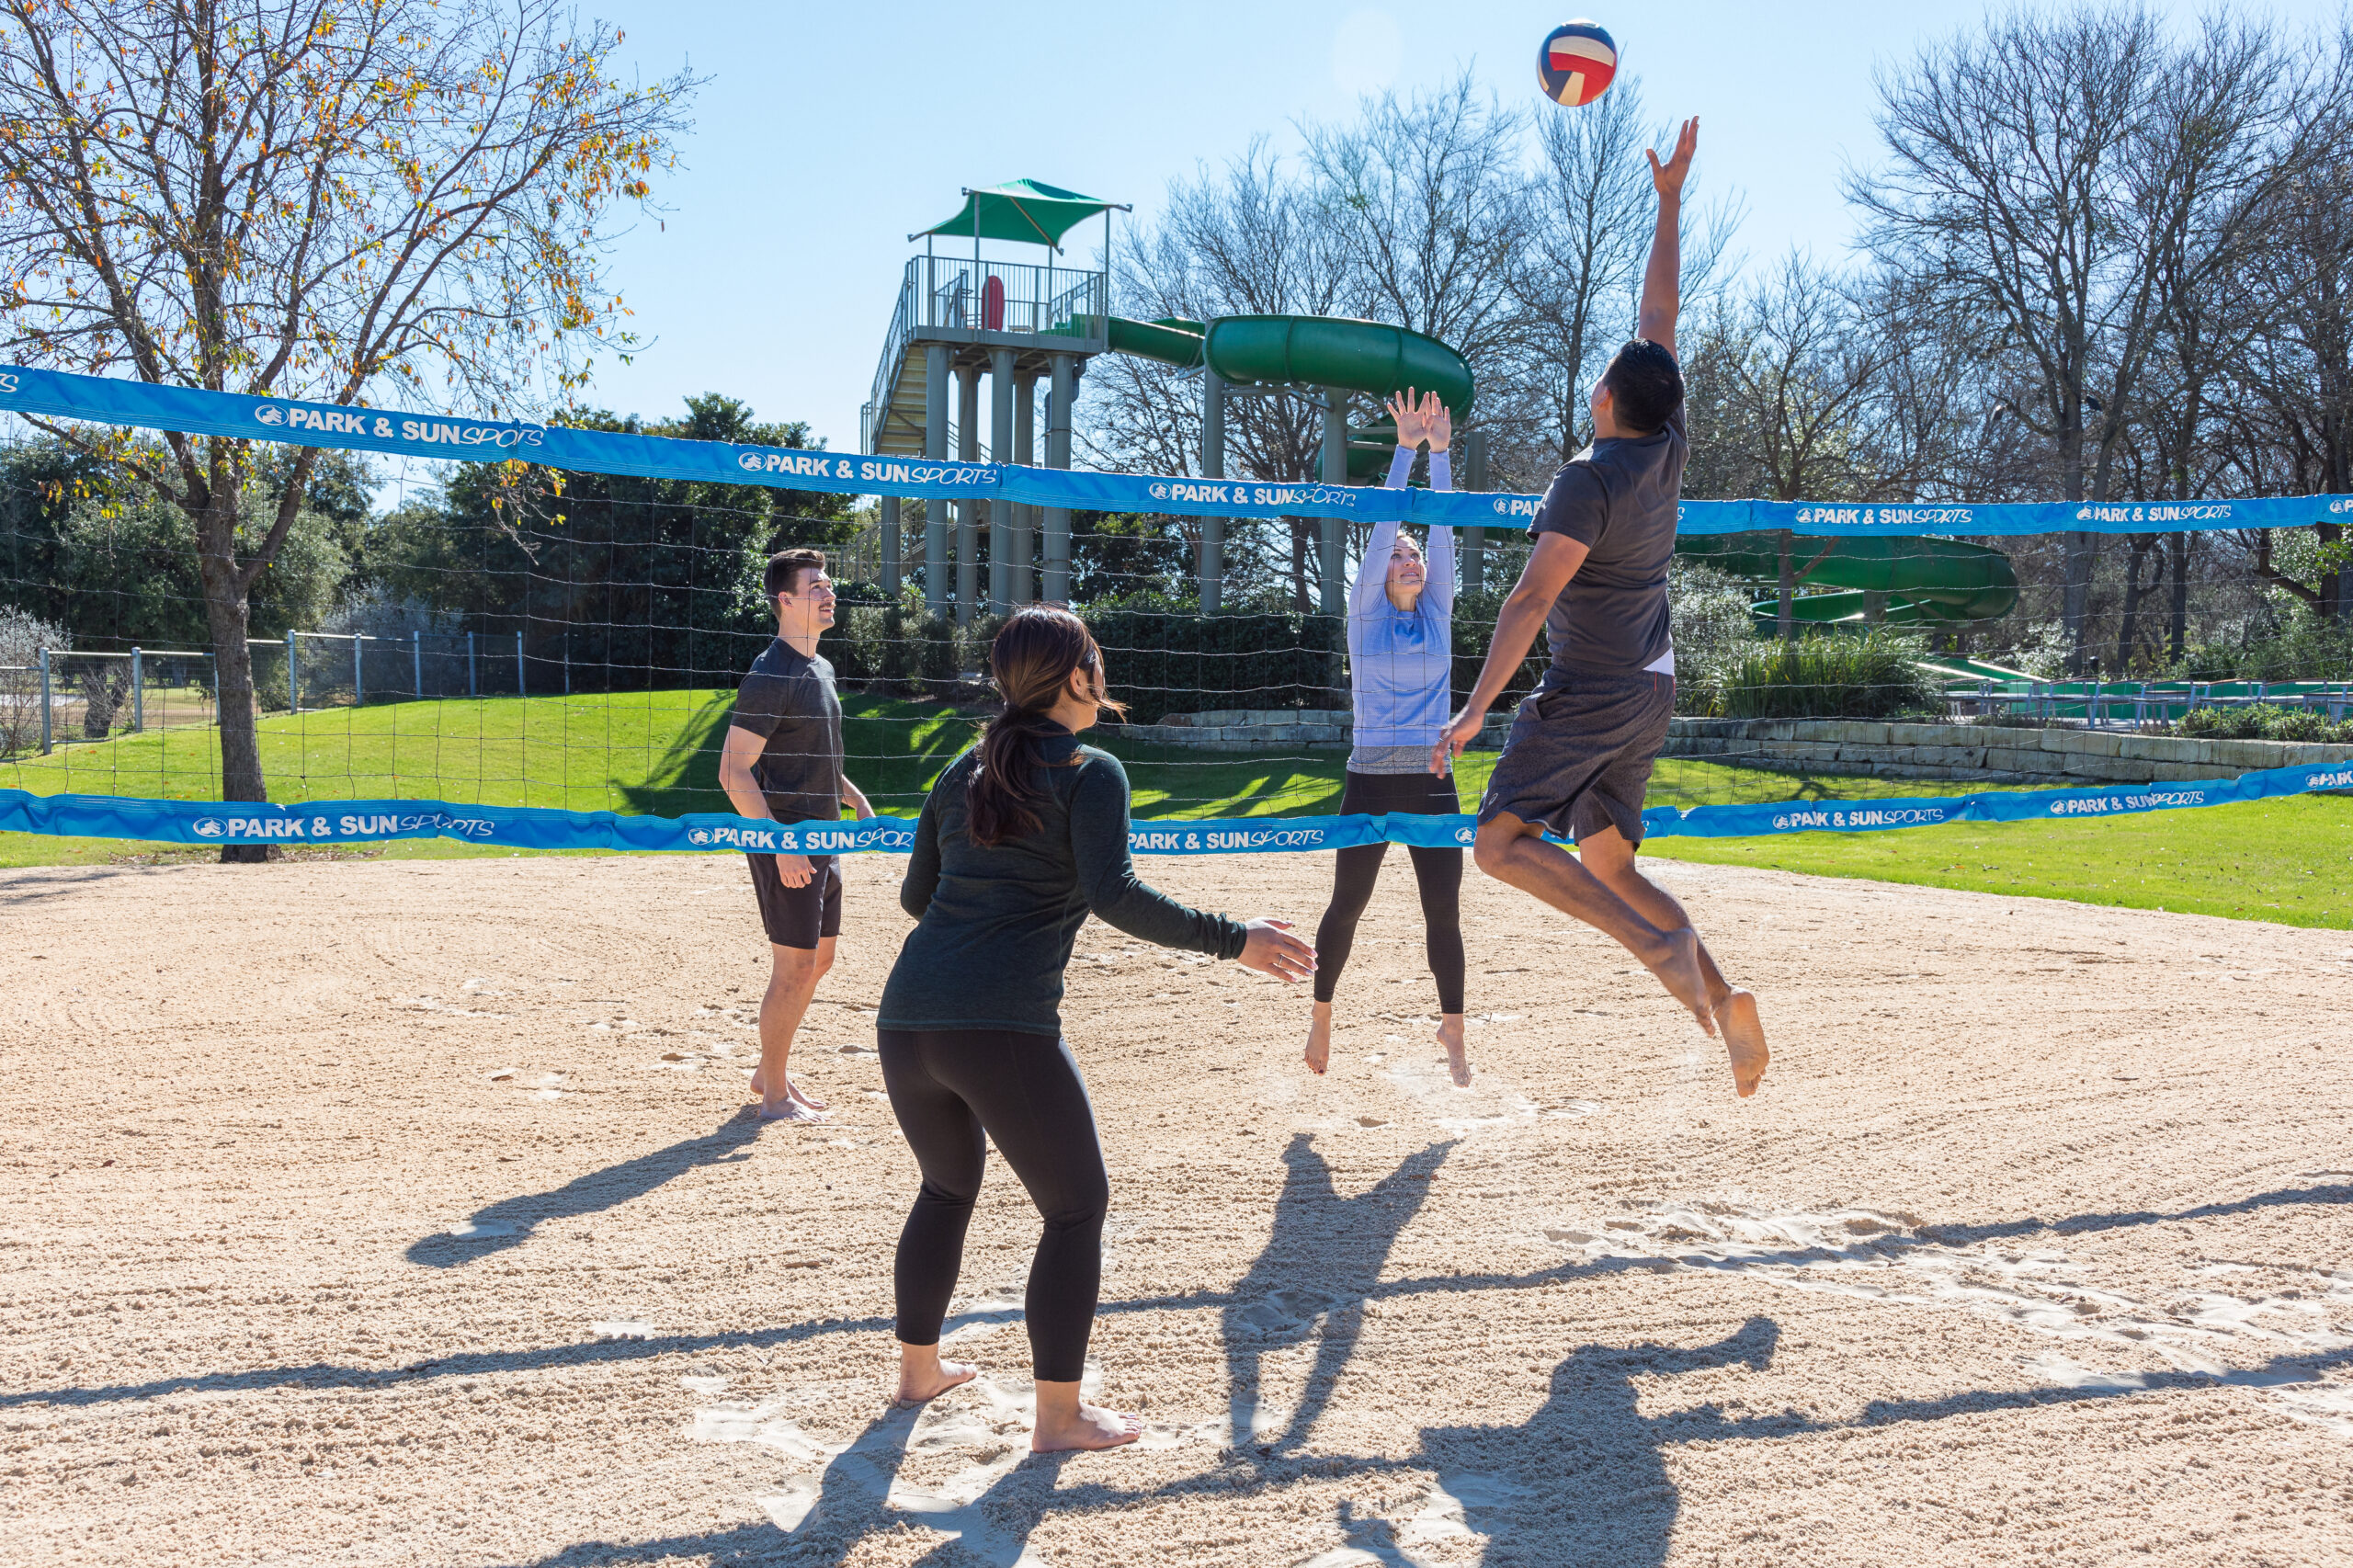 Four adults playing beach volleyball in a public park.